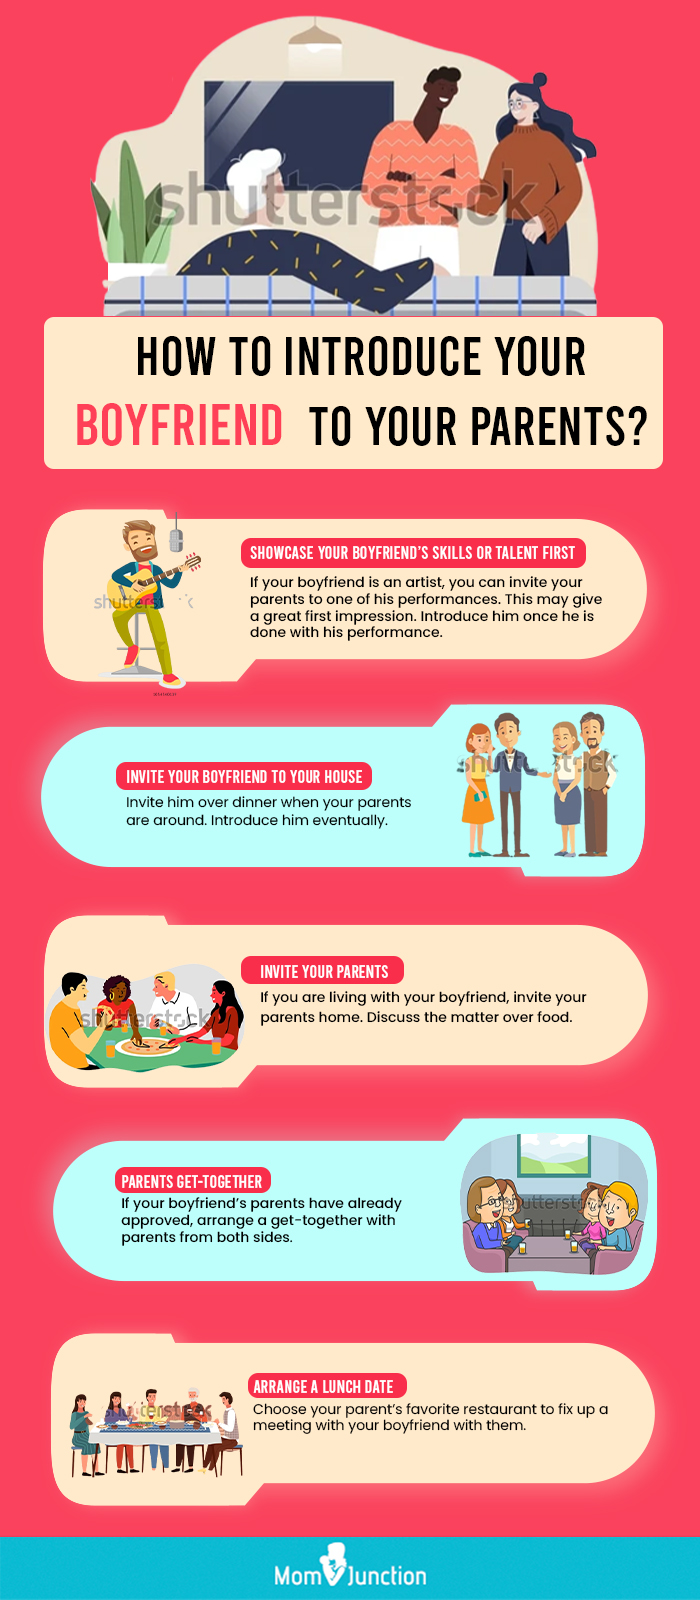 how to introduce your boyfriend to your parents [infographic]